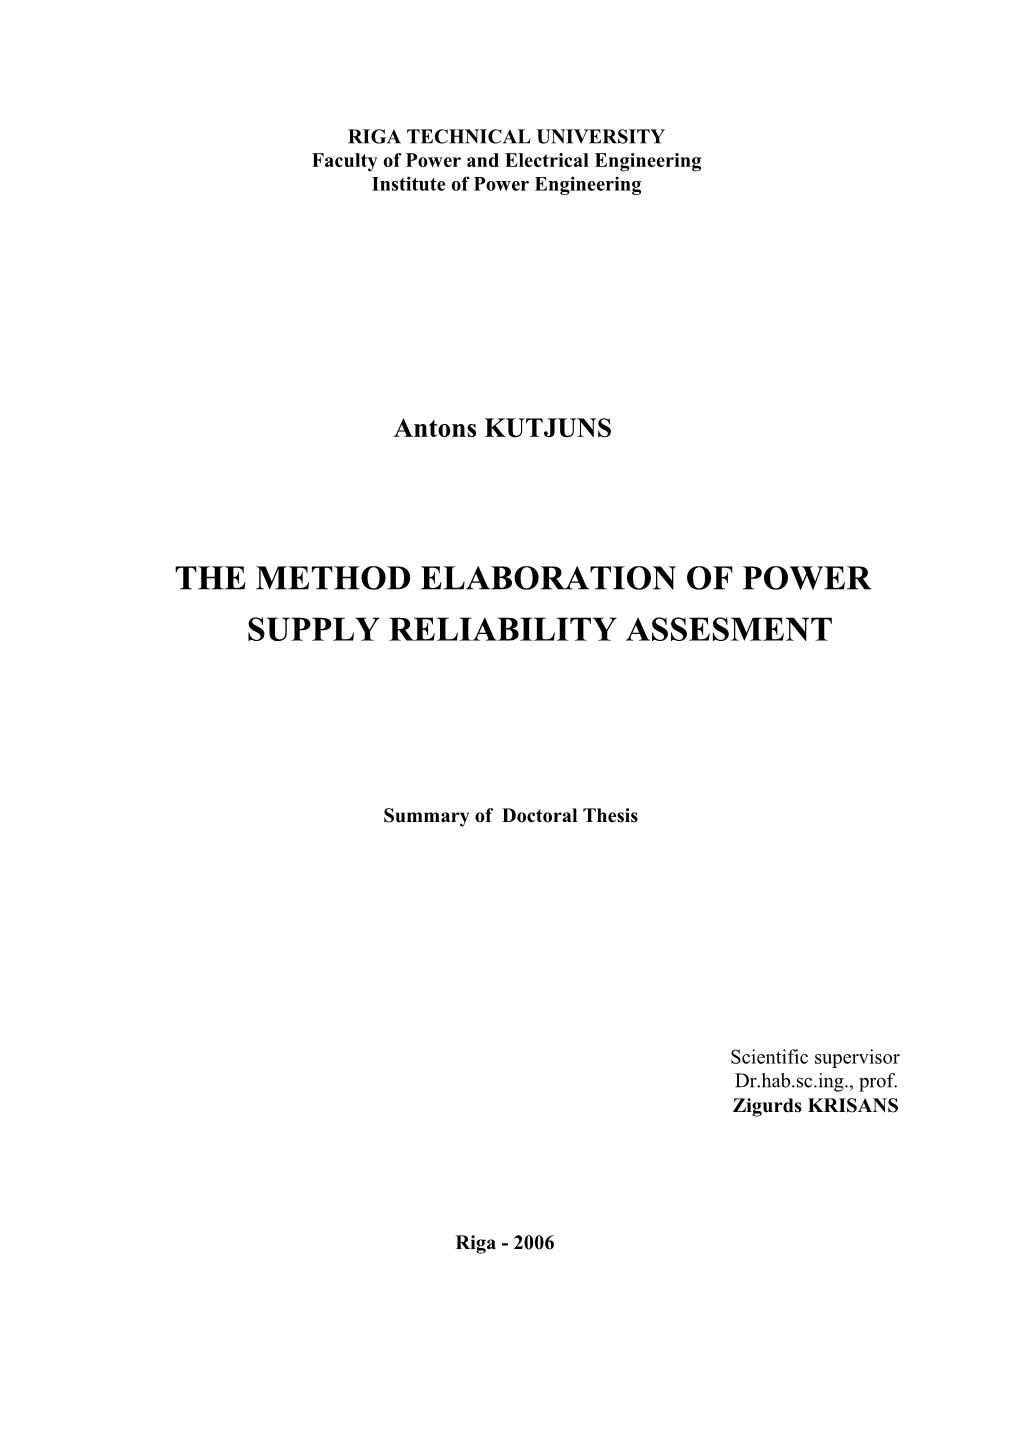 Antons Kutjuns. the Method Elaboration of Power Supply Reliability Assessment. Doctoral